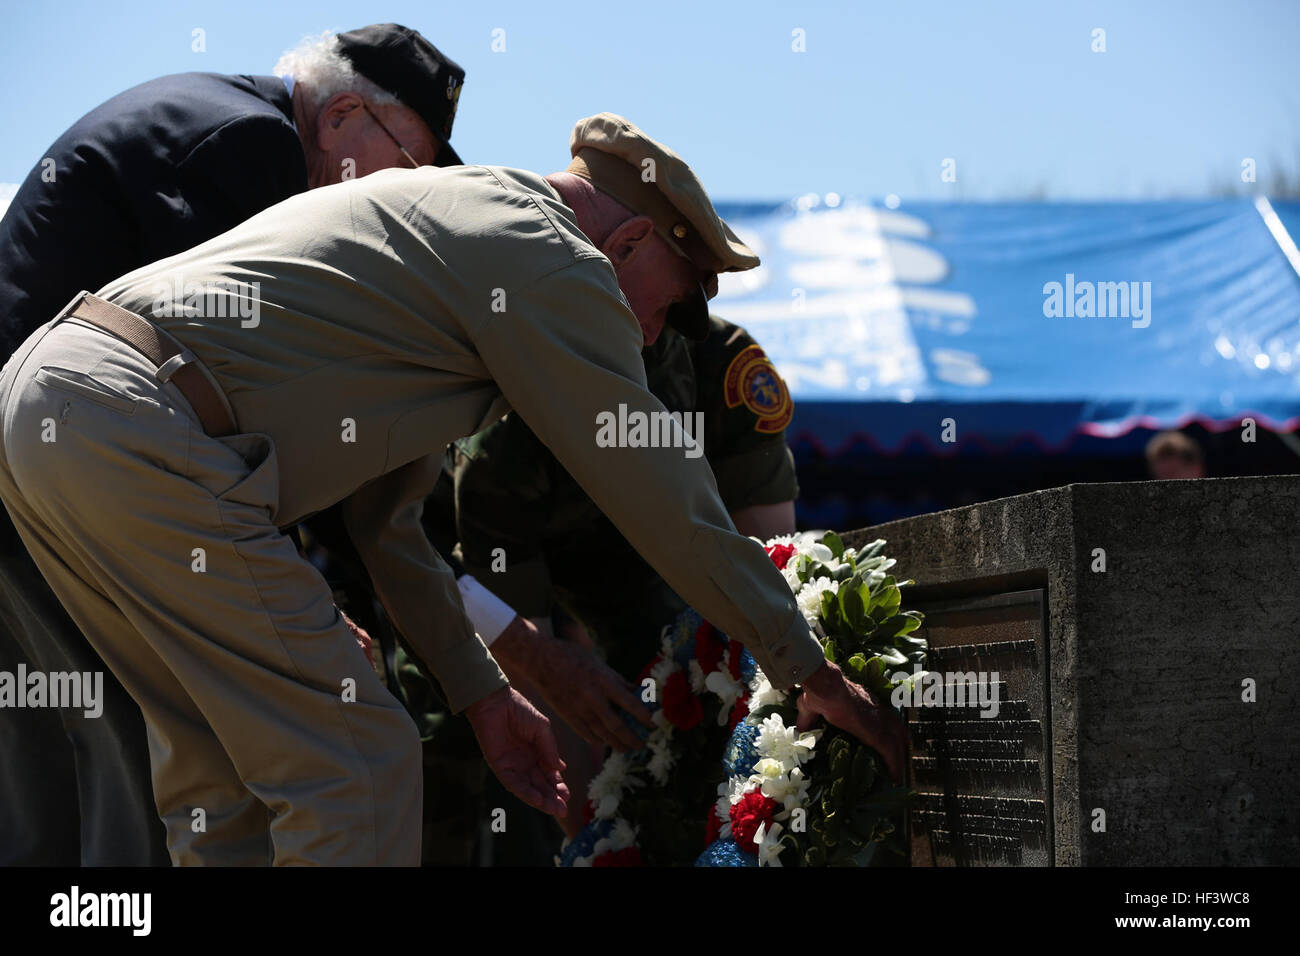 Retired U.S. Army Air Corps Capt. Jerry Yellin , front, and John Jack Lizere, a U.S. Marine Corps veteran of Iwo Jima, present a flower wreath during the 71st Commemoration of the Battle of Iwo Jima at Iwo To, Japan, March 19, 2015. The Iwo Jima Reunion of Honor is an opportunity for Japanese and U.S. veterans and their families, dignitaries, leaders and service members from both nations to honor the battle while recognizing 71 years of peace and prosperity in the U.S. – Japanese alliance. (U.S. Marine Corps photo by MCIPAC Combat Camera Lance Cpl. Juan Esqueda / Released) Iwo Jima 71st Reunio Stock Photo